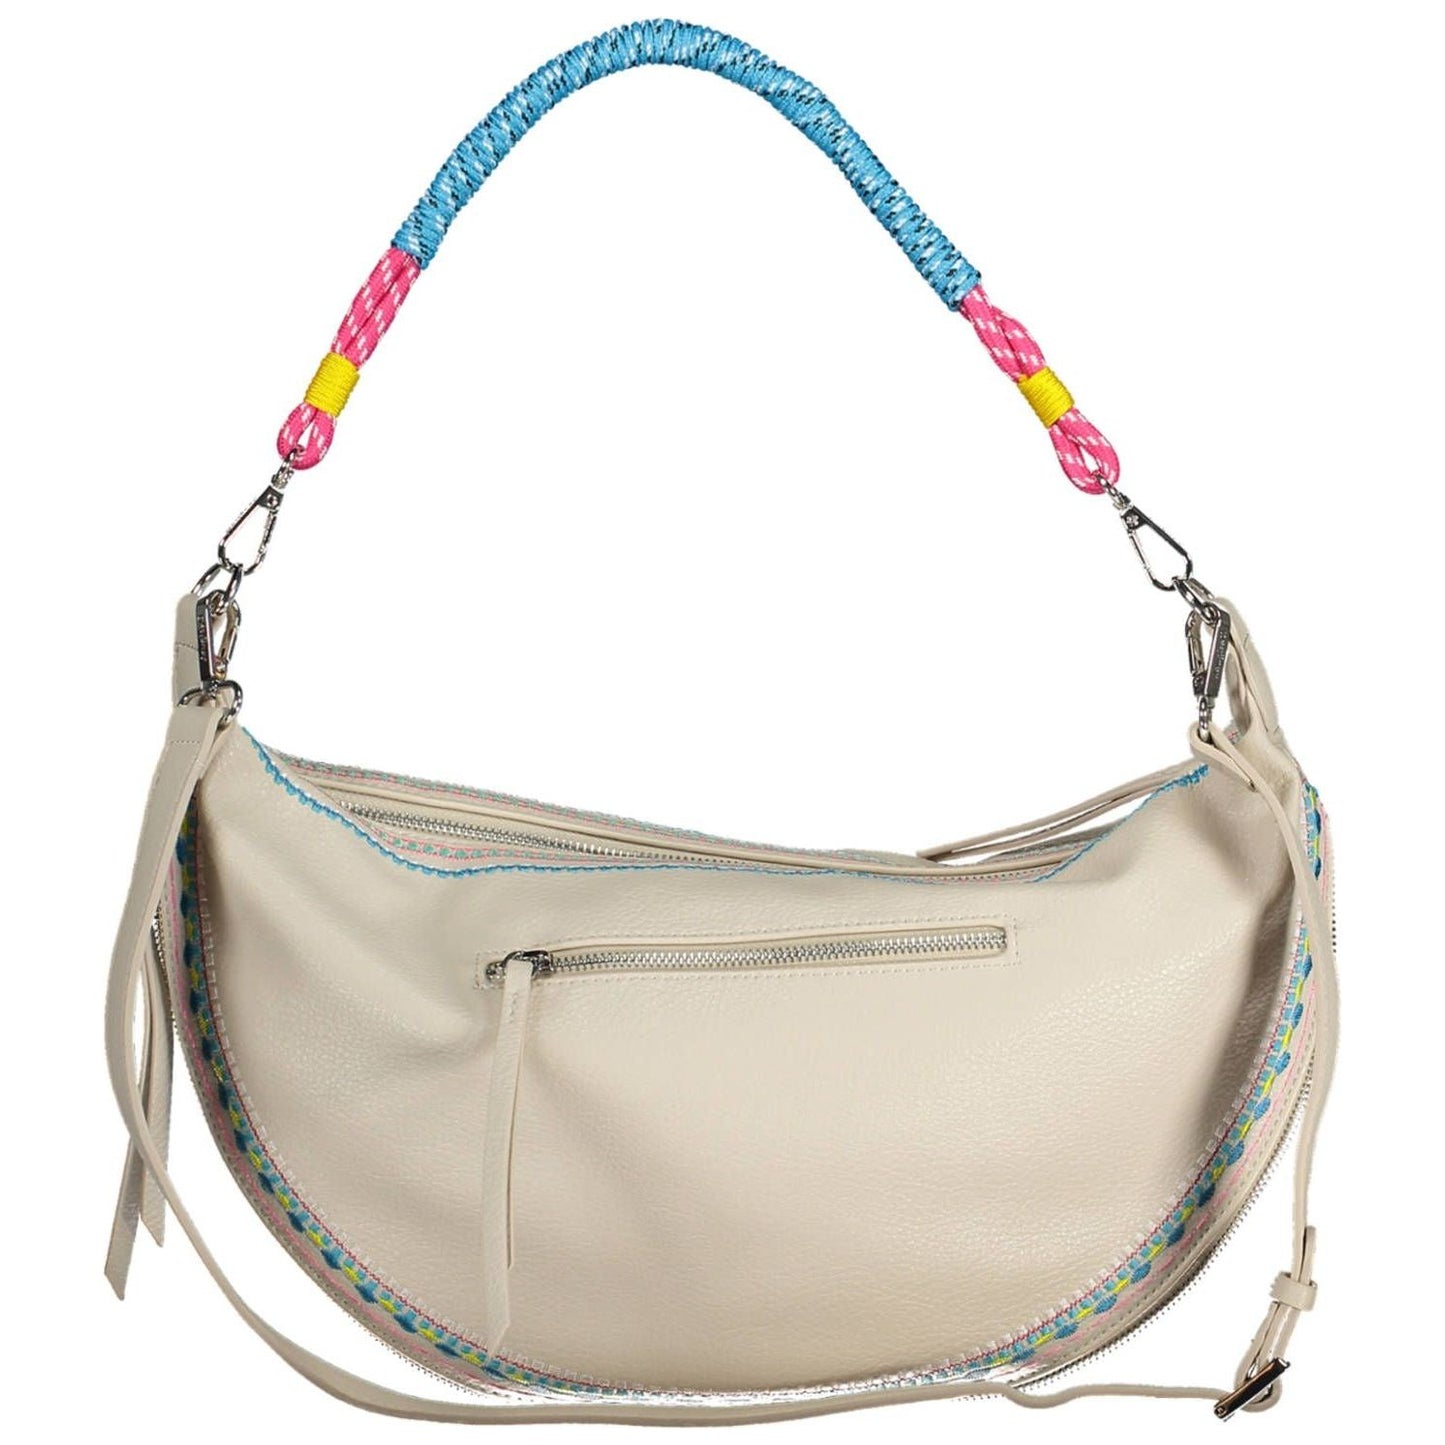 Desigual Chic White Embroidered Expandable Handbag chic-white-embroidered-expandable-handbag